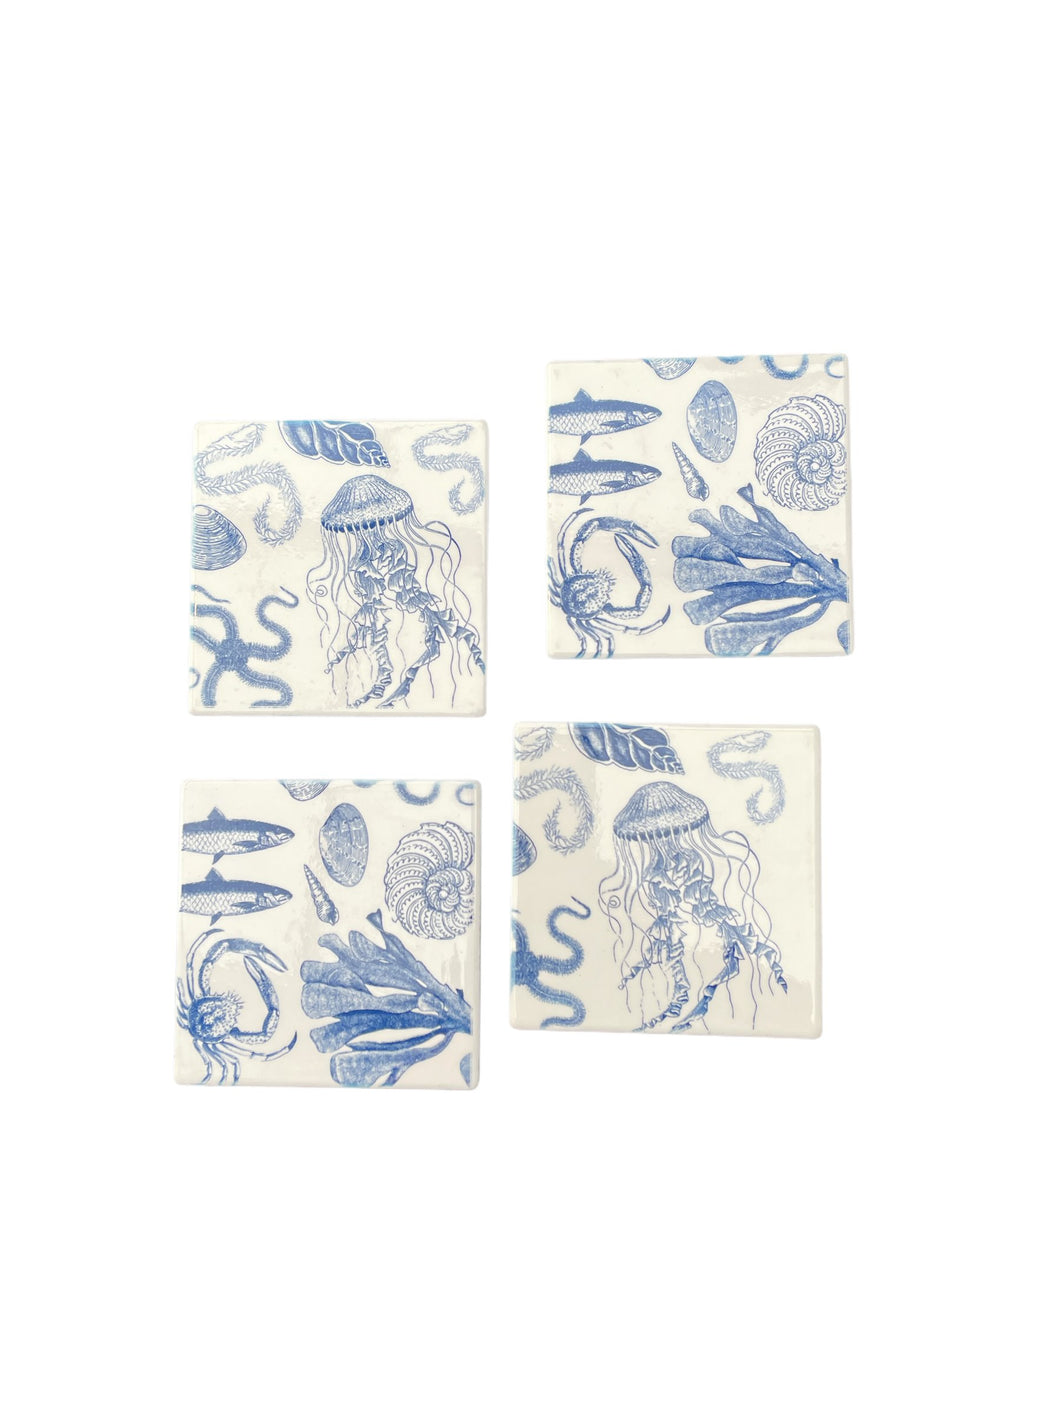 Wholesale Antiquarian Sealife Ceramic Coasters - Mustard and Gray Trade Homeware and Gifts - Made in Britain